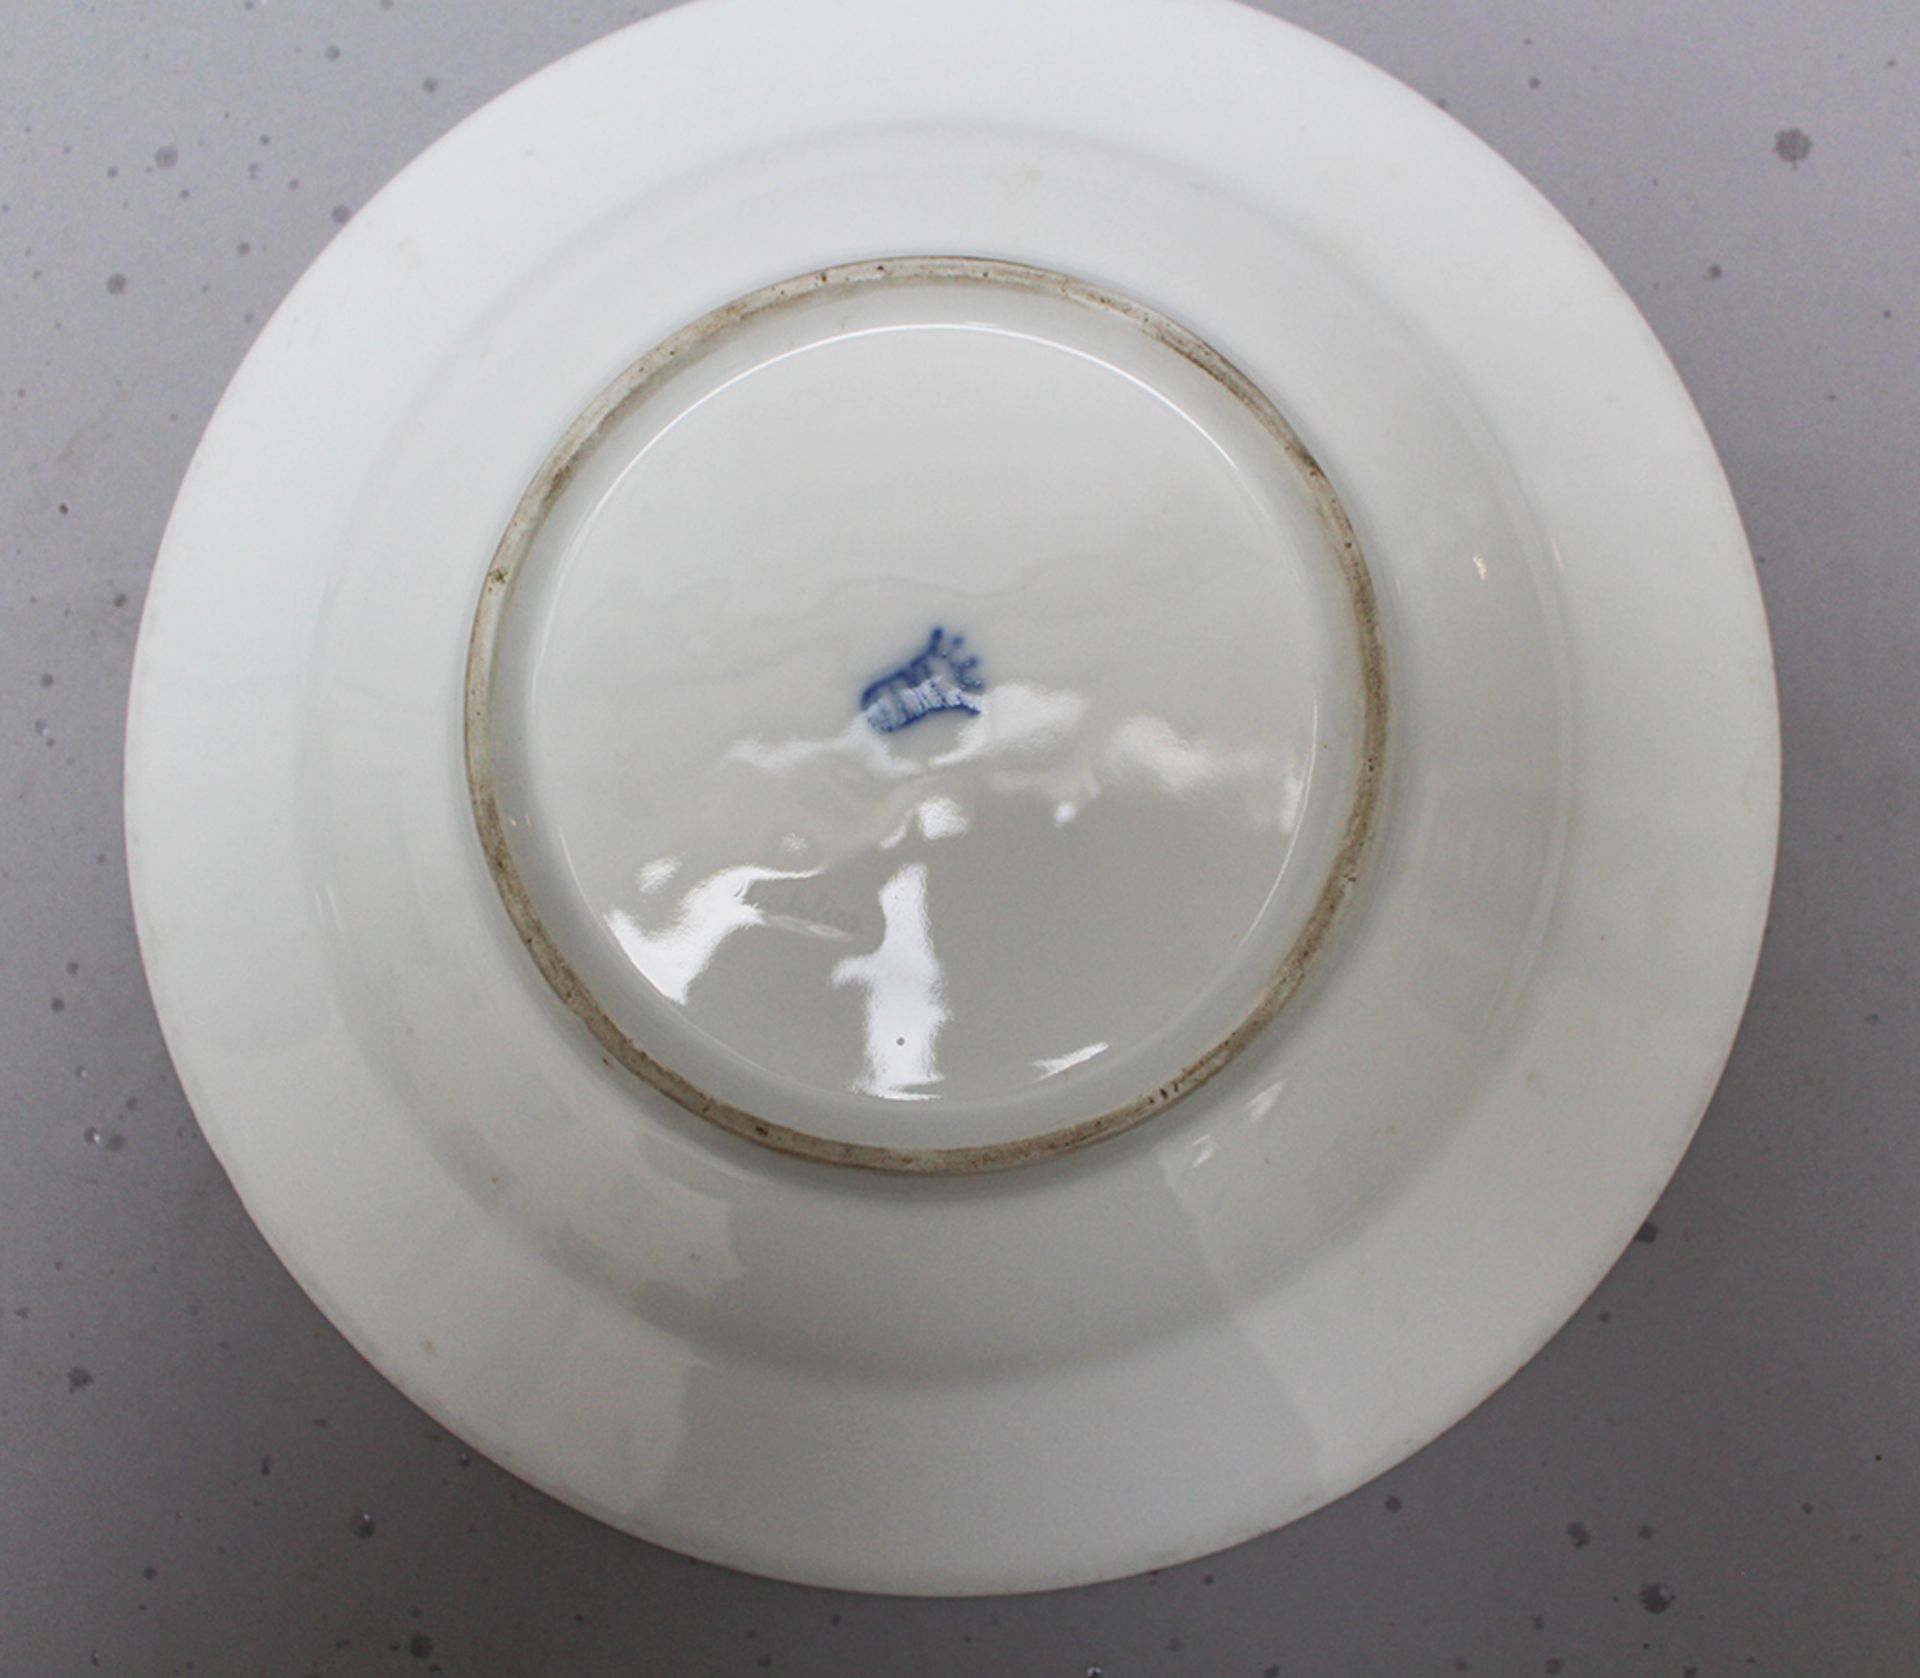 Vienna porcelain dish , painted with flowers , blue bottom mark. 24.5 cm diameter - Image 3 of 3